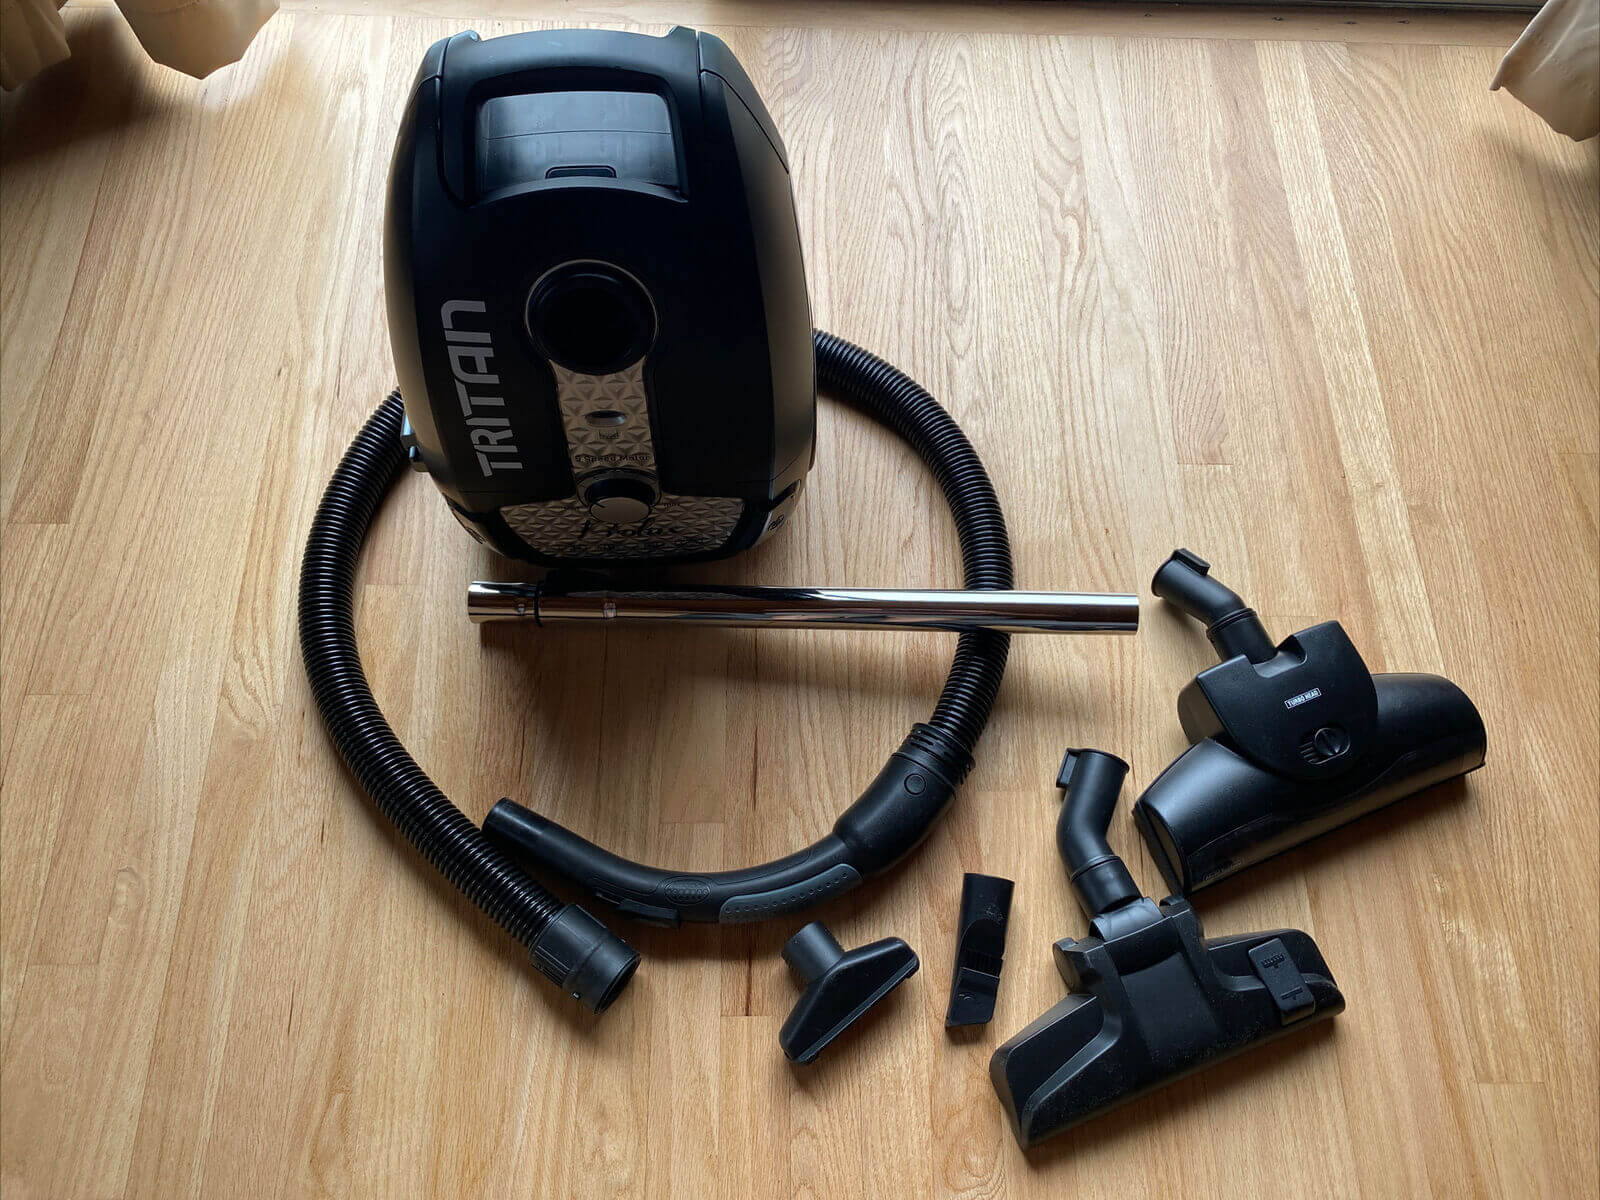 Top 4 Canister Vacuums With Powerhead – Winter 2023